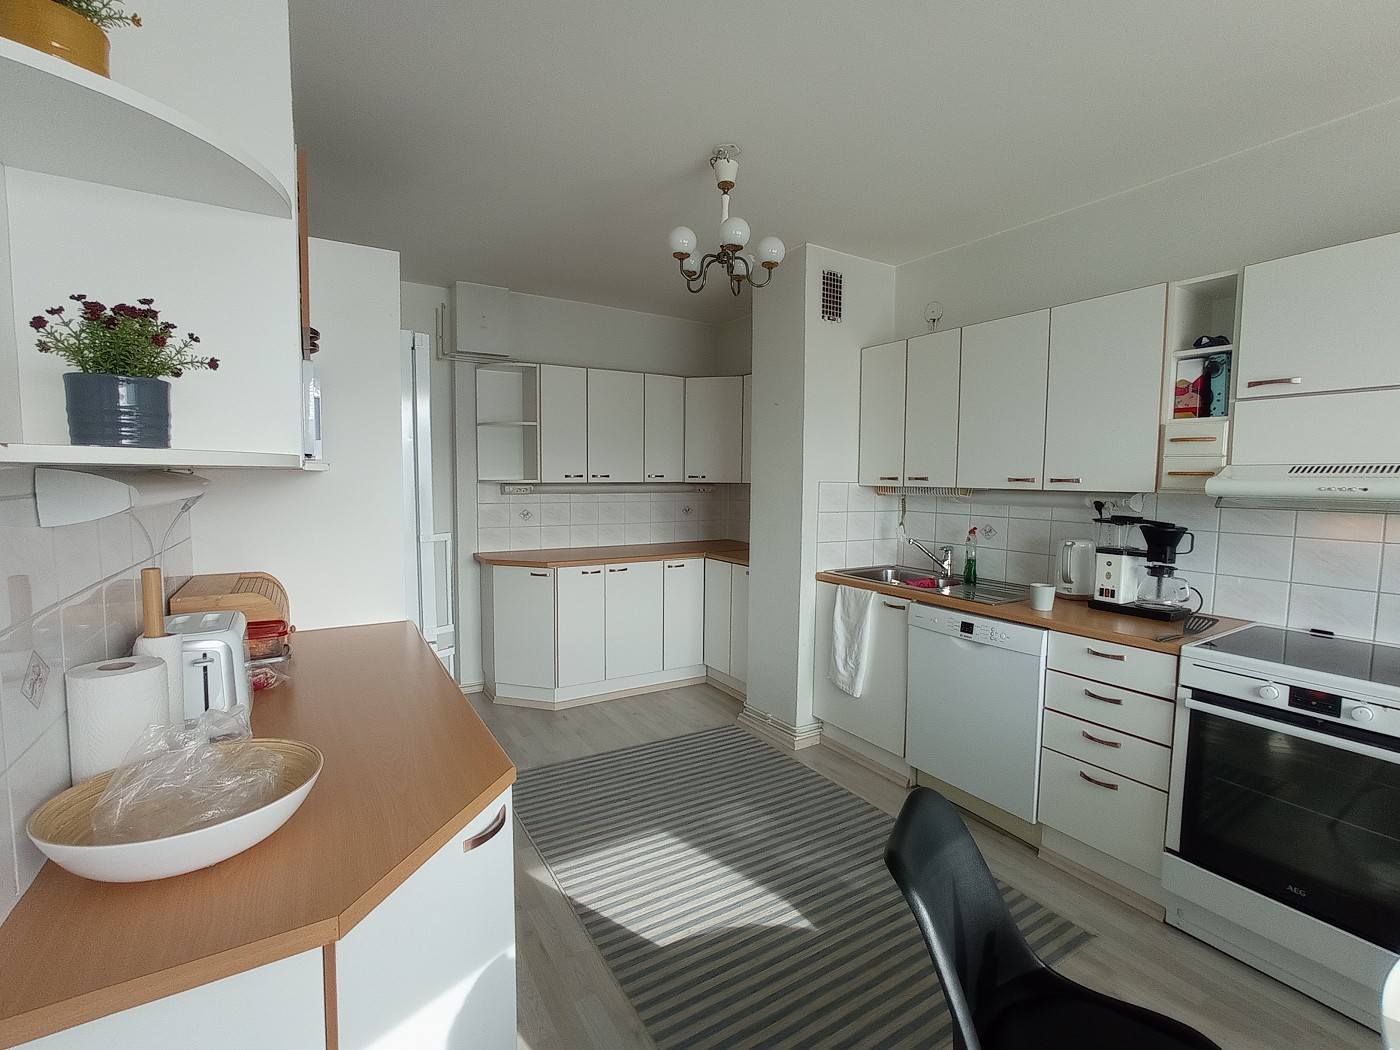 spacious kitchen Oulu well-equipped stocked pantry Airbnb